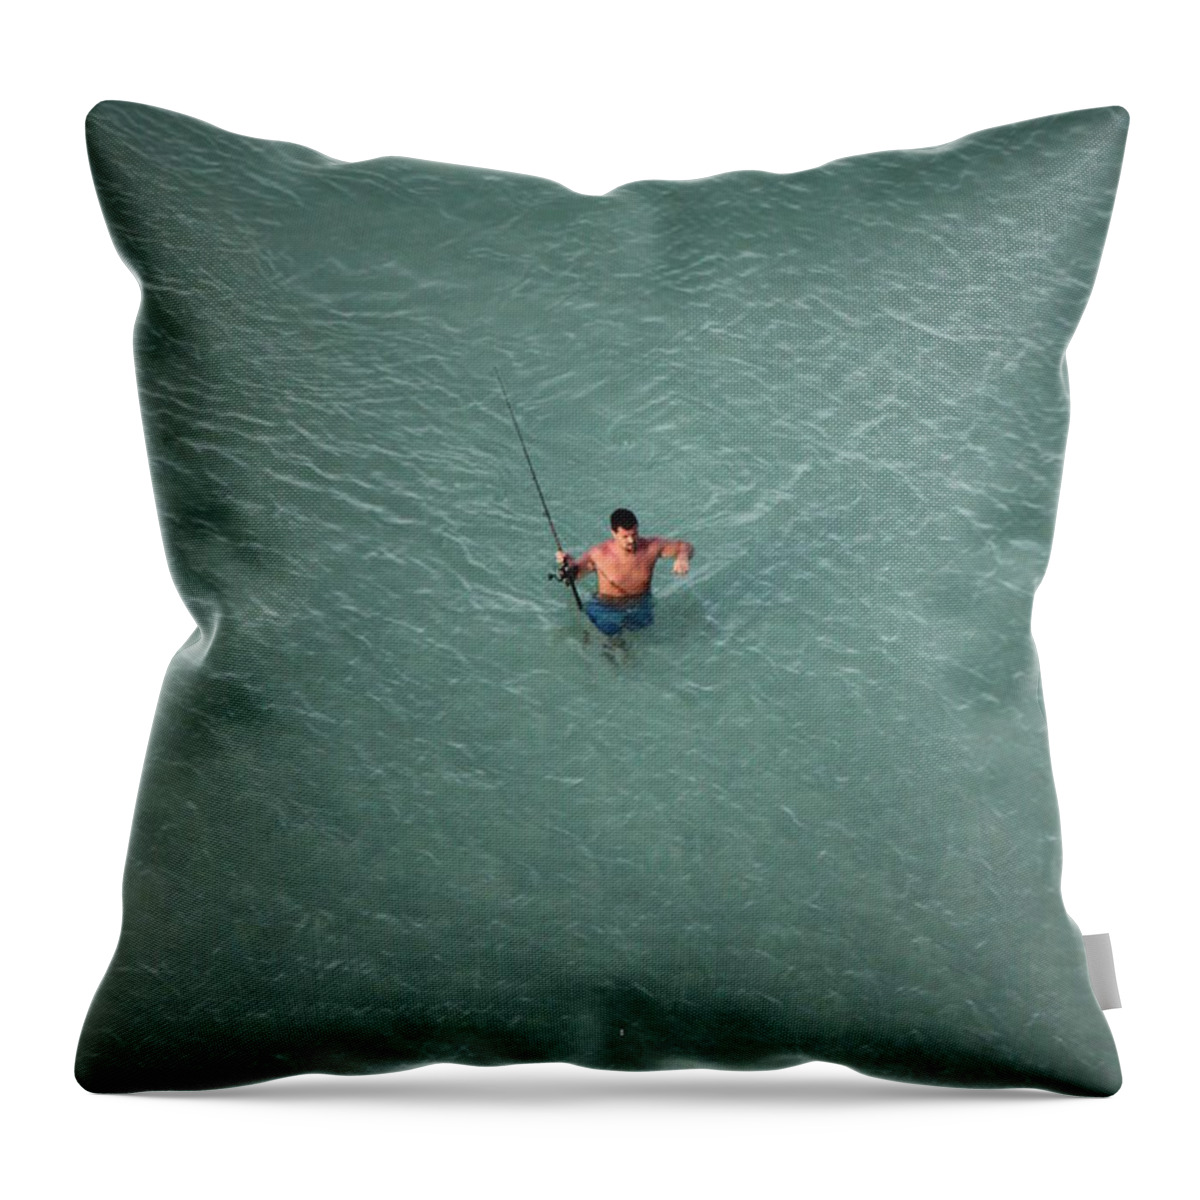 Human Throw Pillow featuring the photograph Fishing in the deep blue waters of Florida's Emerald Coast by Jennifer E Doll